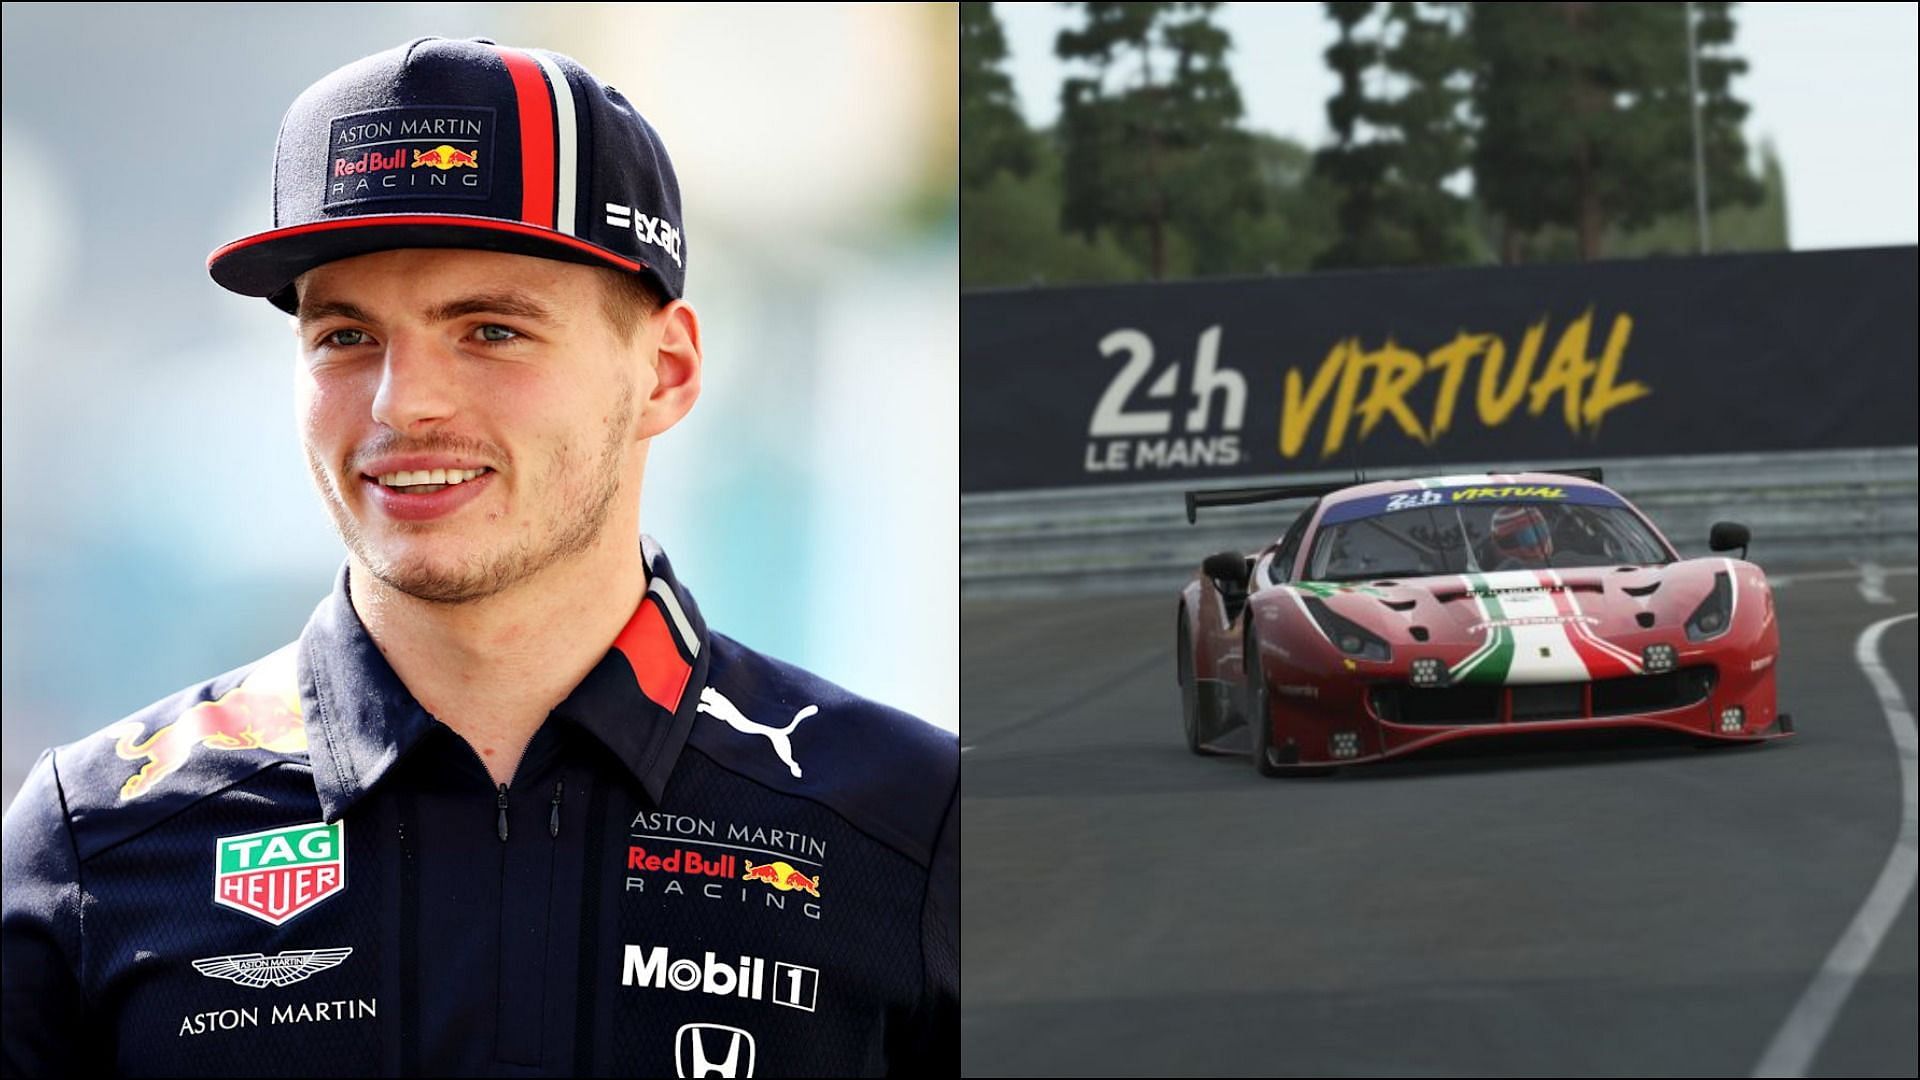 Max Verstappen crashes out of the race, losing the 24h Le Mans Virtual (Image via Sportskeeda)